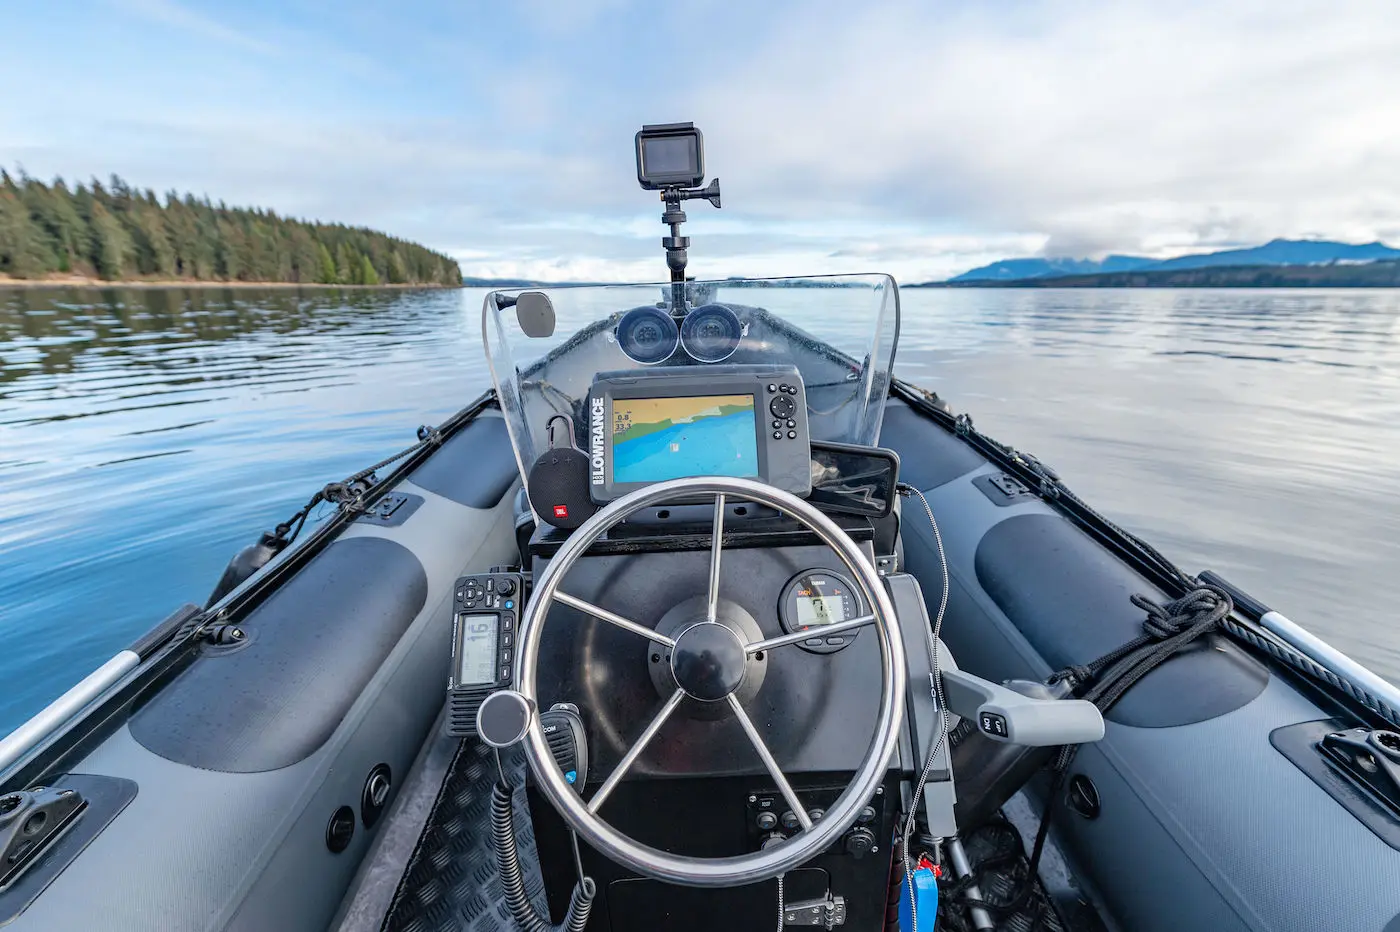 Boating Licenses Required to Operate an Inflatable Boat in Canada